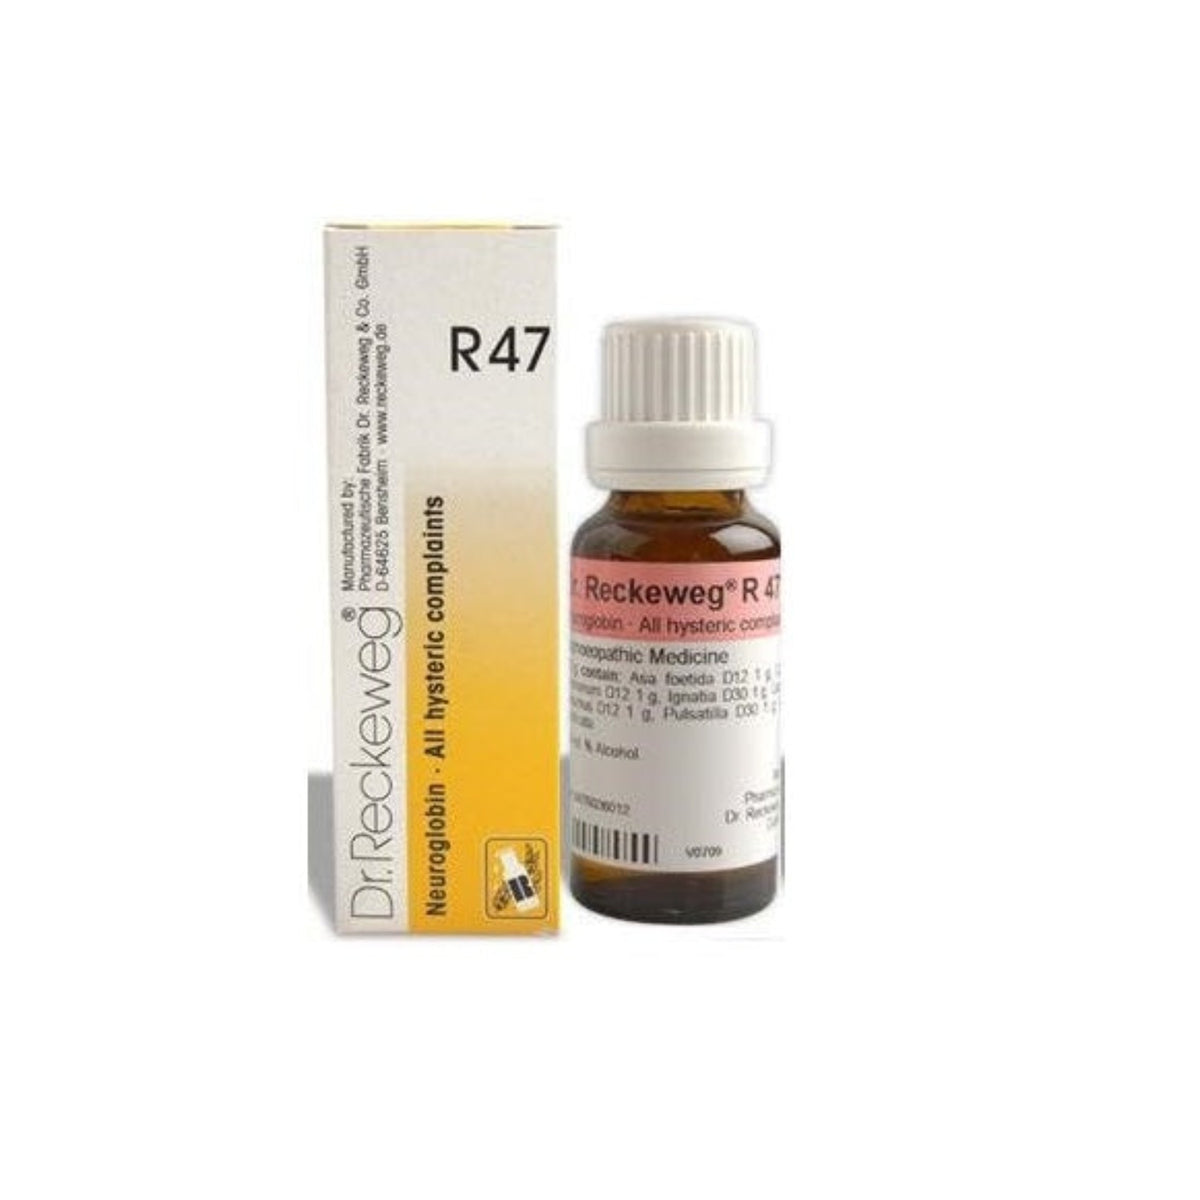 Dr Reckeweg Homoeopathy R47 All Hysteric Complaints Drops 22 ml